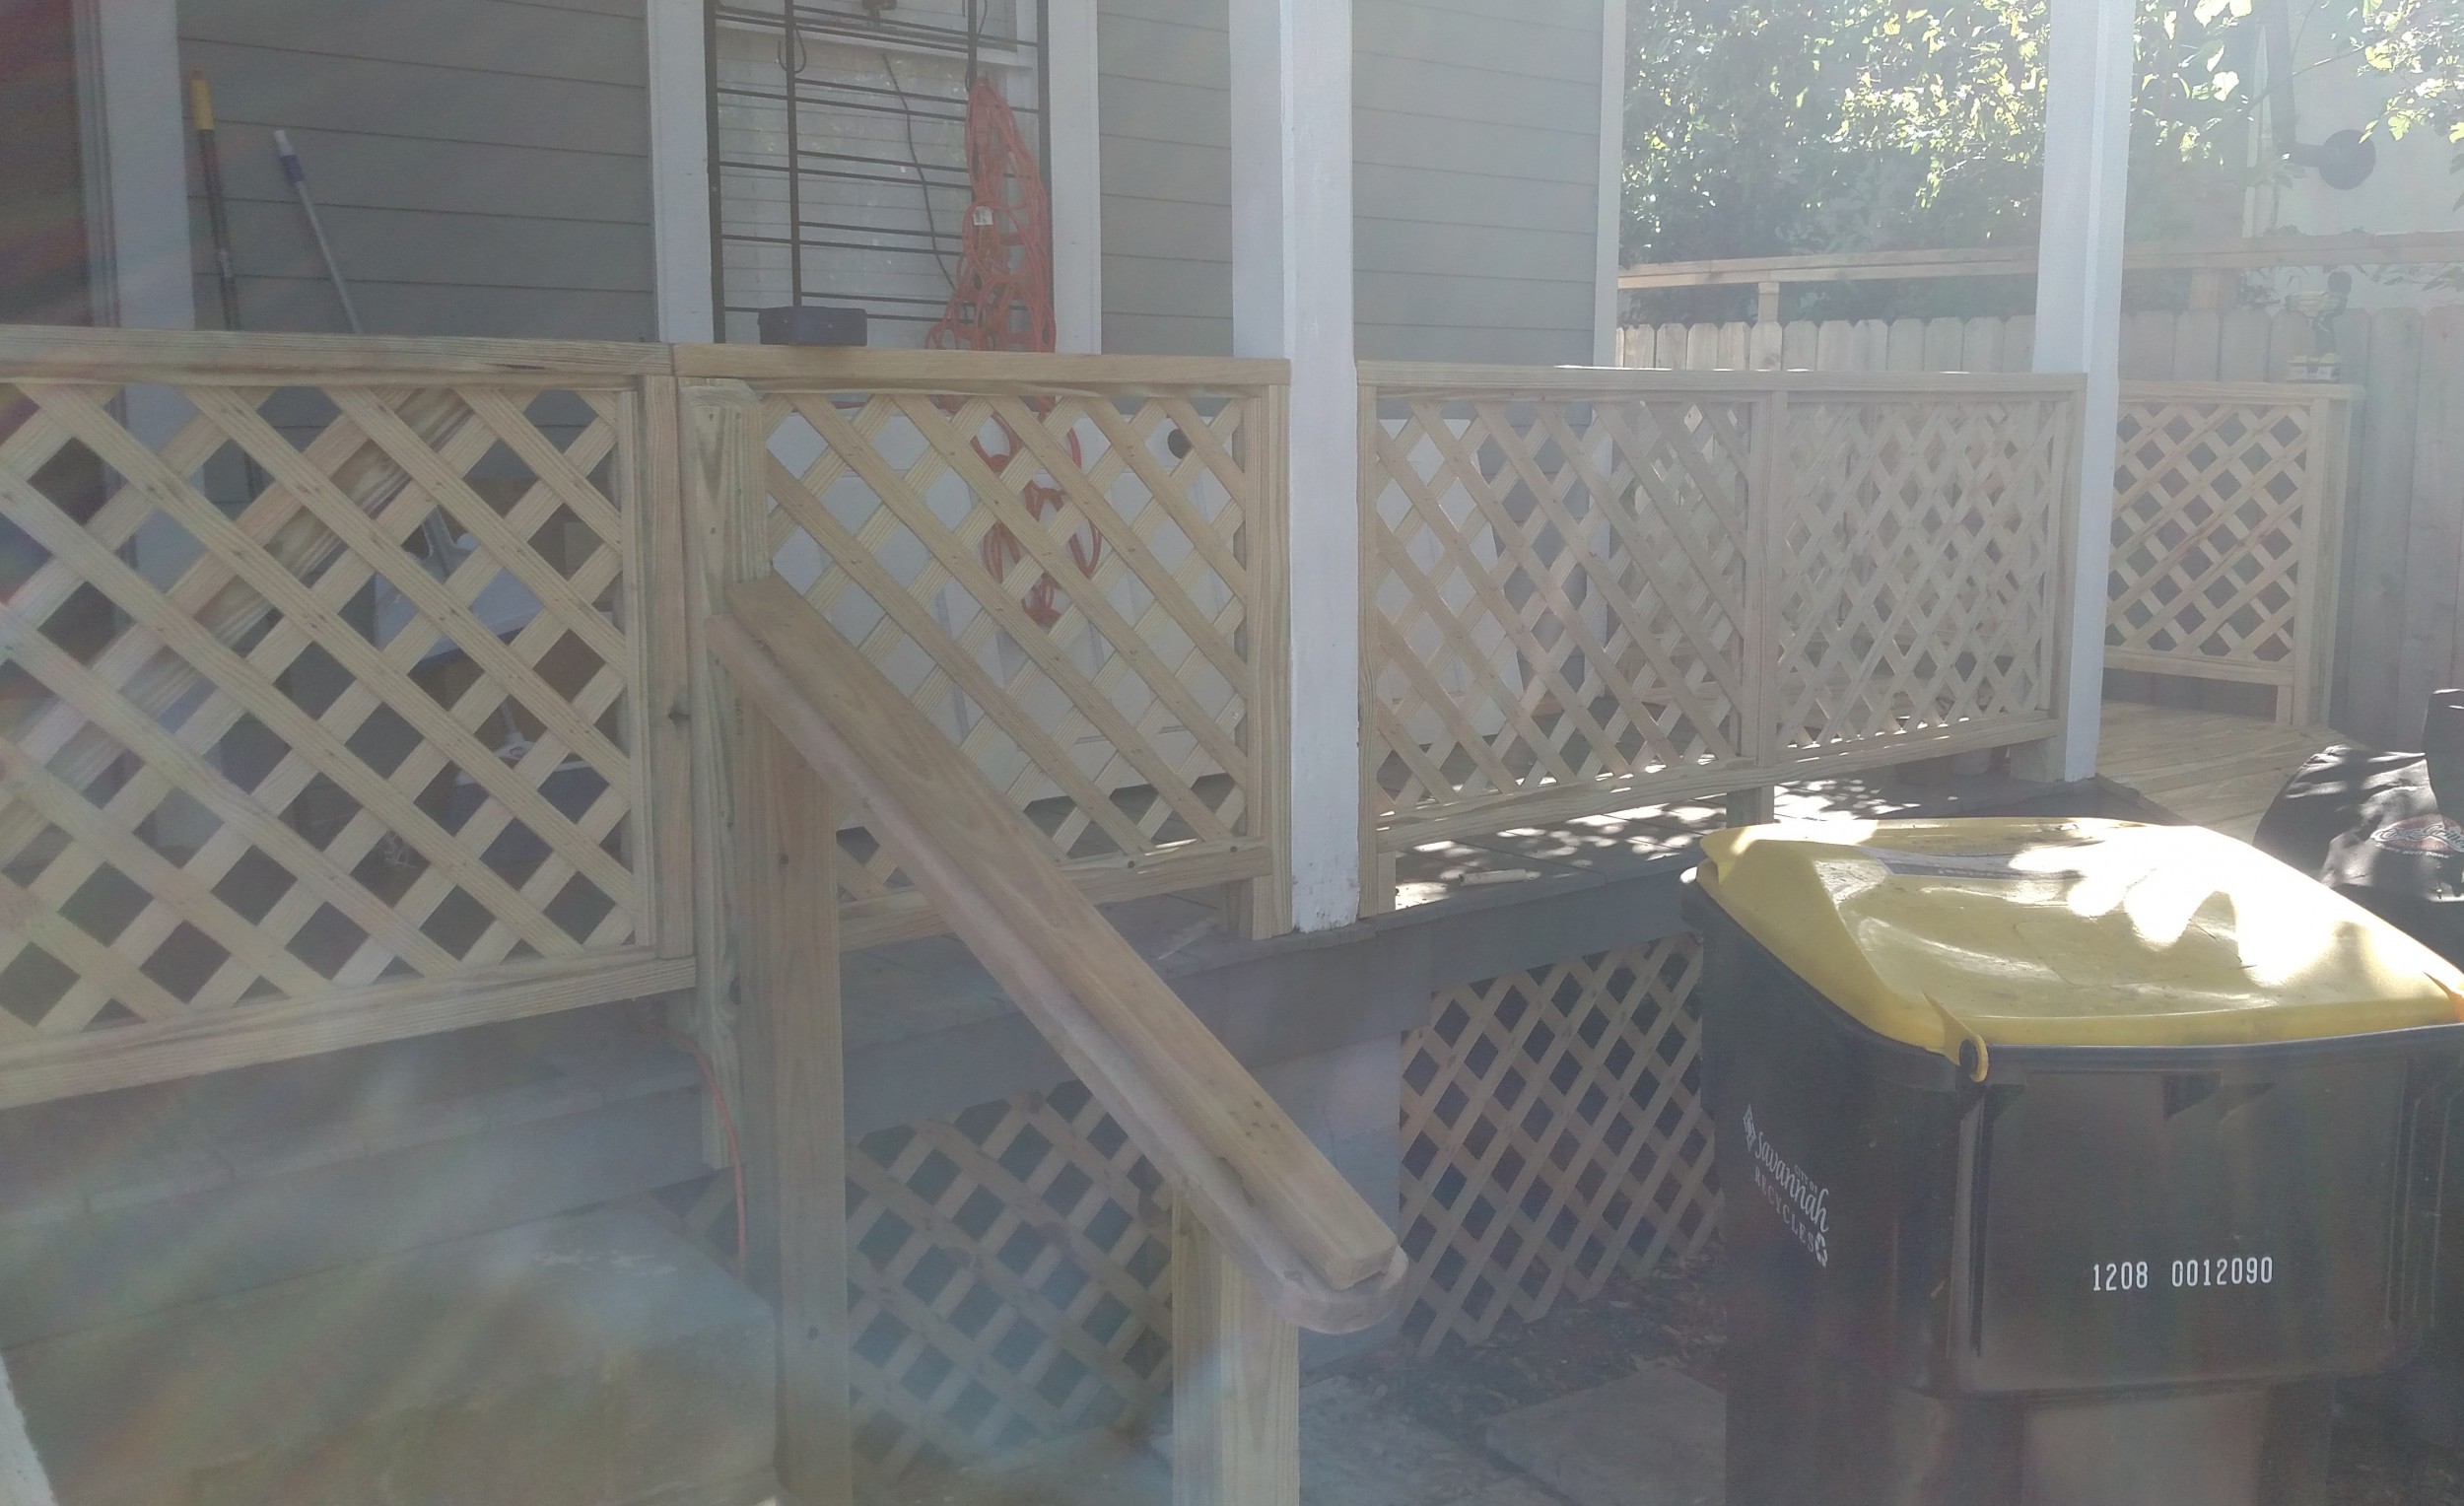 Added railing, gate, and banister to existing deck.